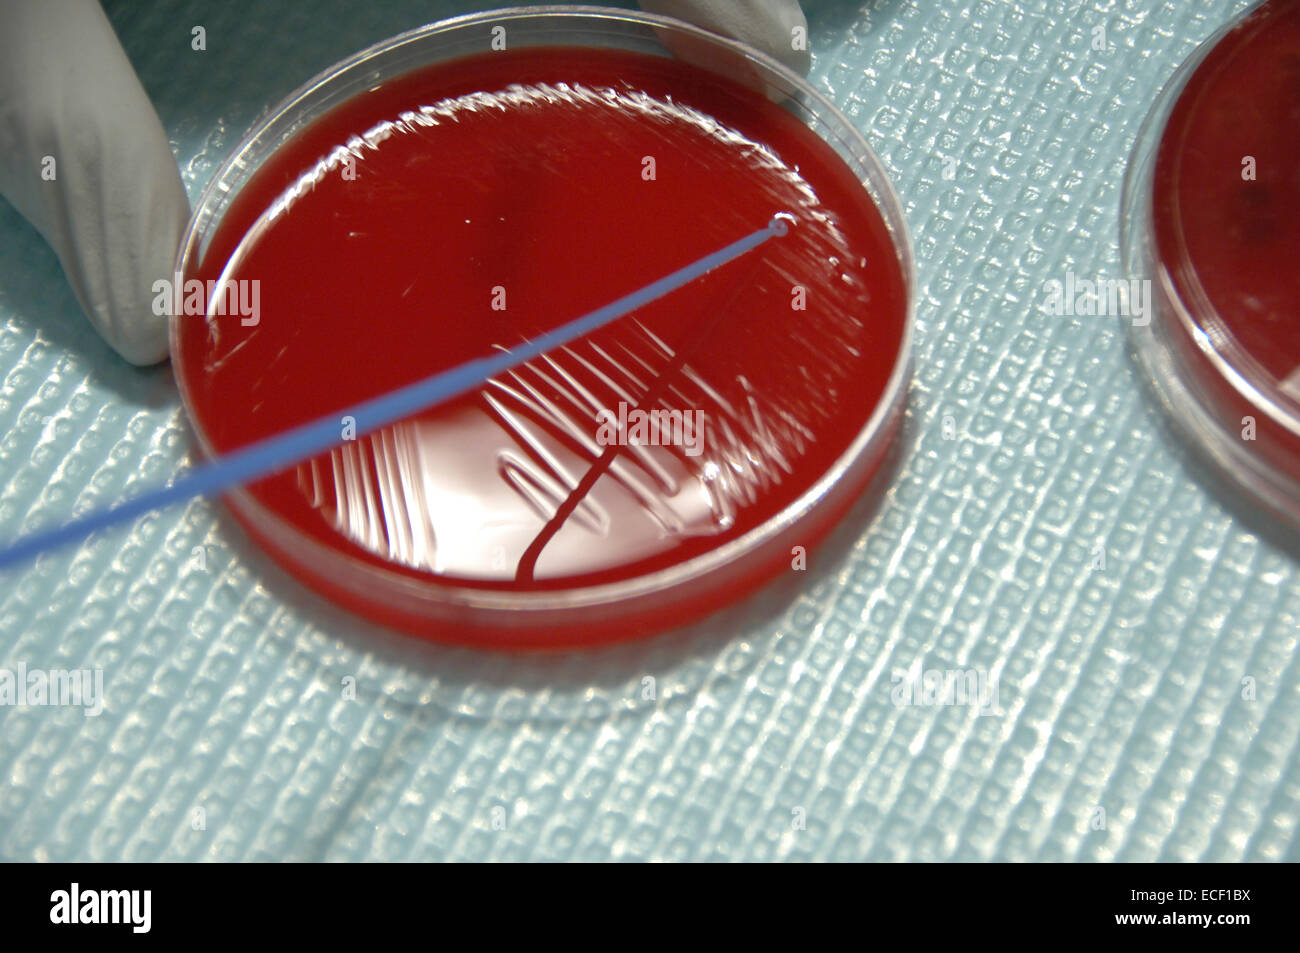 Staphylococcus bacteria from human skin grown on agar in the laboratory. Stock Photo